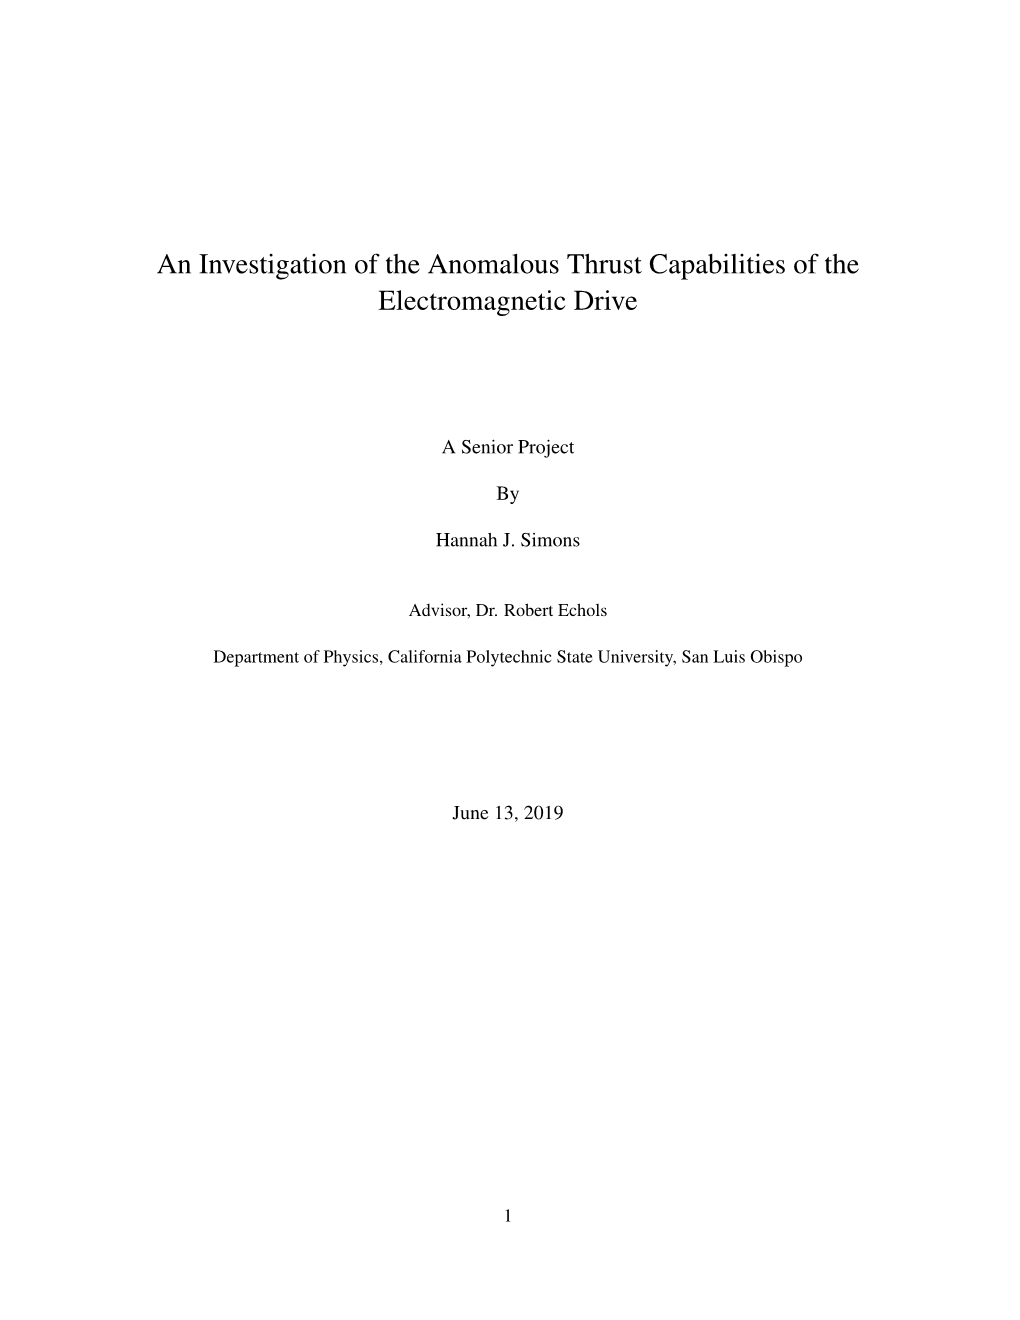 An Investigation of the Anomalous Thrust Capabilities of the Electromagnetic Drive